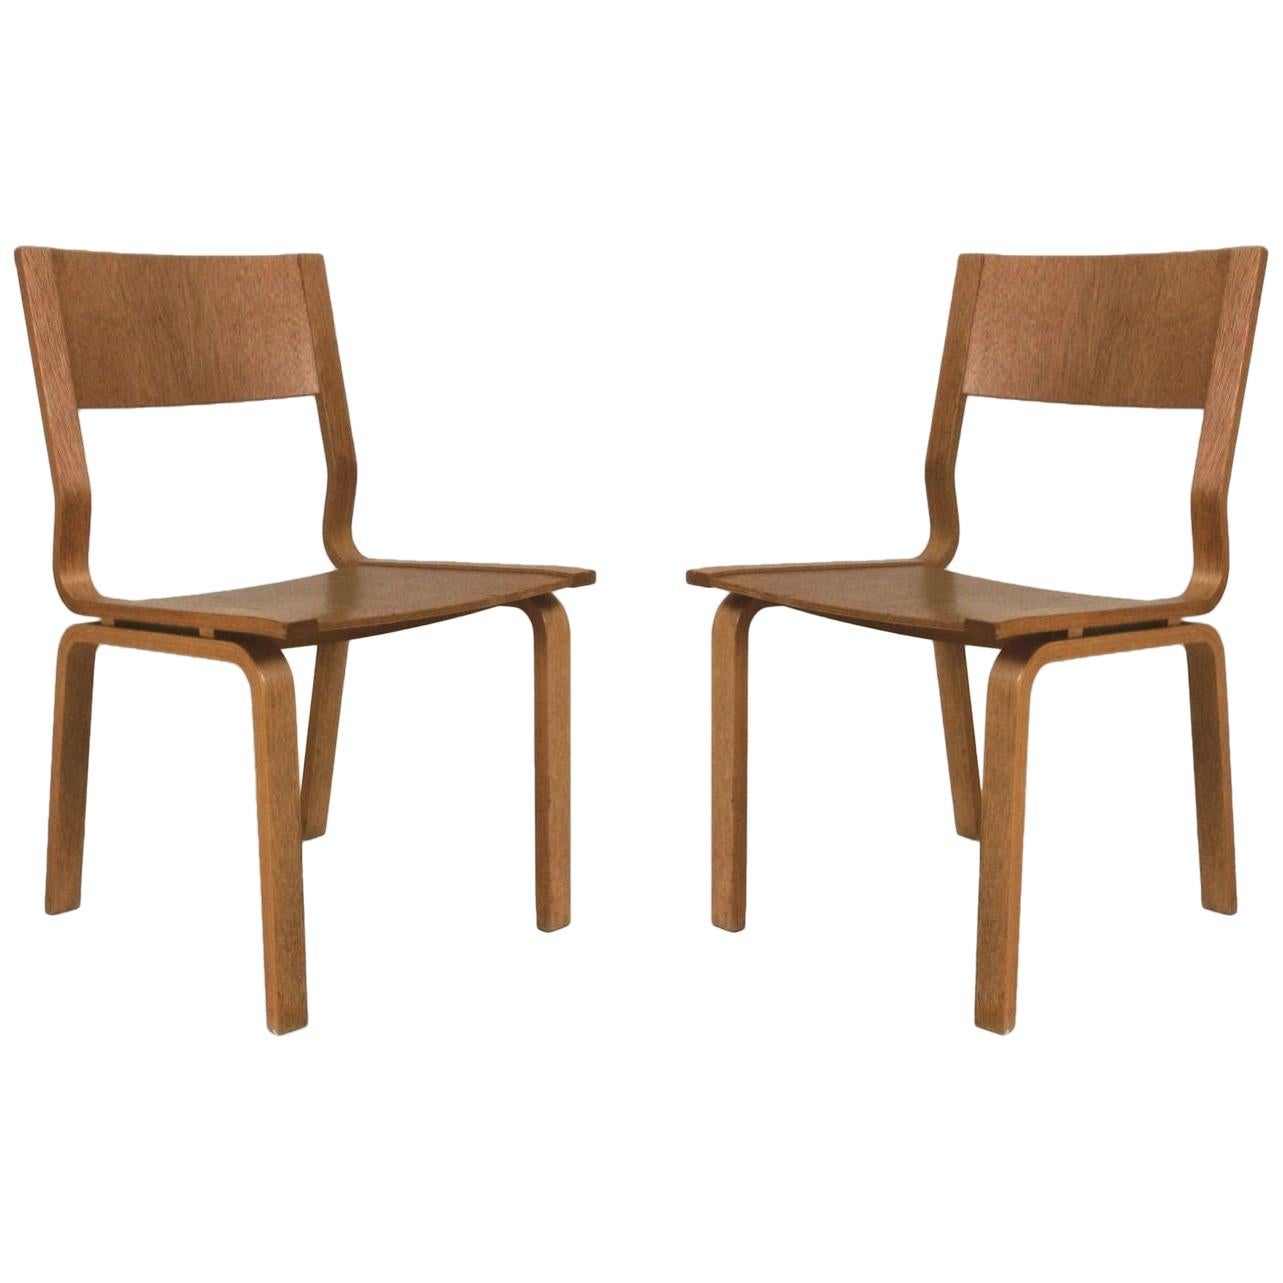 1965 Arne Jacobsen Set of Two Saint Catherines Chairs in Laminated Oak